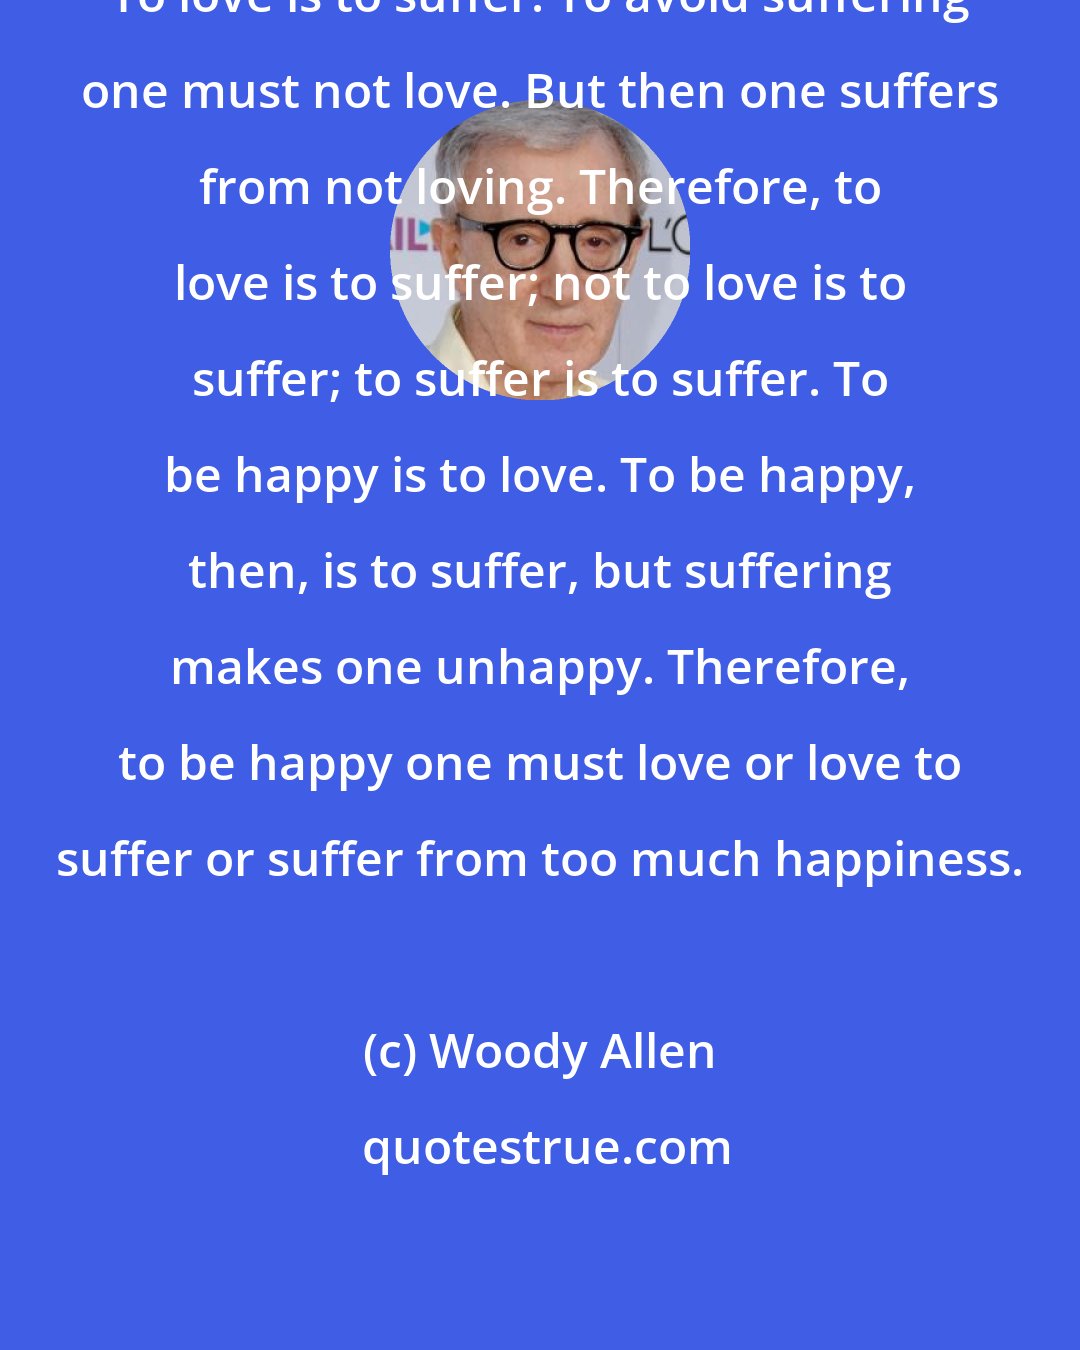 Woody Allen: To love is to suffer. To avoid suffering one must not love. But then one suffers from not loving. Therefore, to love is to suffer; not to love is to suffer; to suffer is to suffer. To be happy is to love. To be happy, then, is to suffer, but suffering makes one unhappy. Therefore, to be happy one must love or love to suffer or suffer from too much happiness.